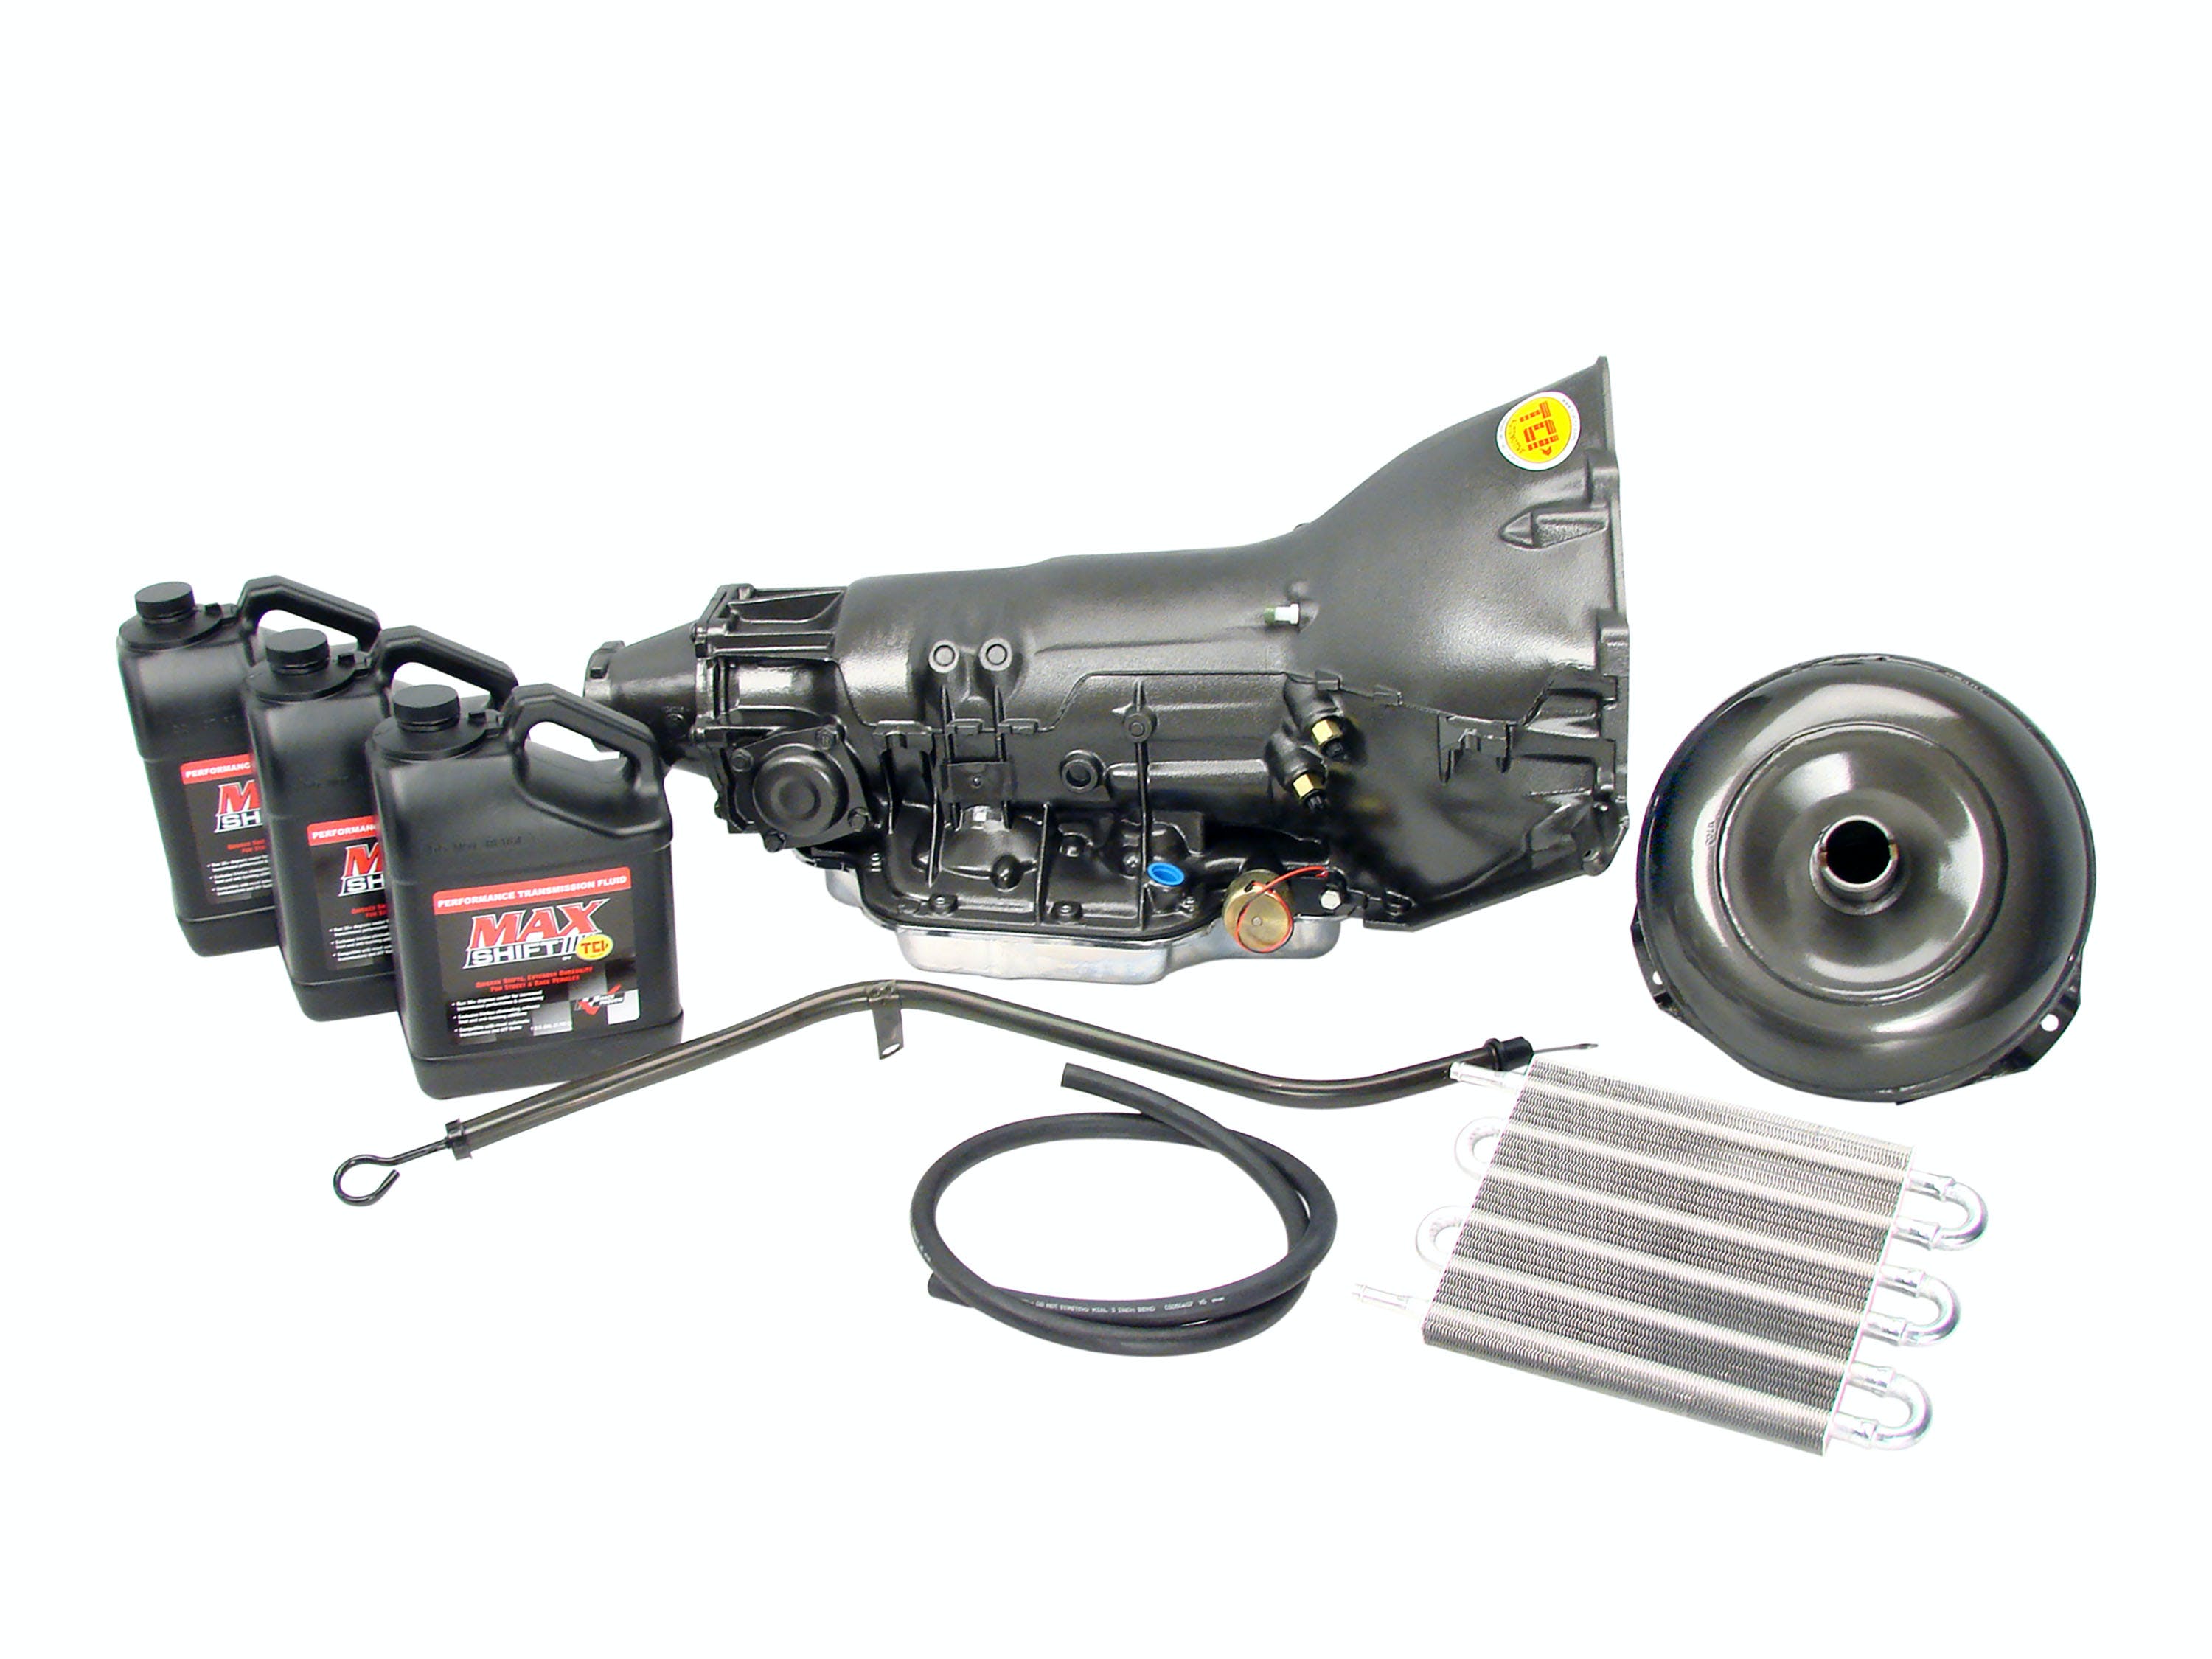 TCI Automotive 211000P3 TH400 StreetFighter Package for Chevrolet Engines w/ Breakaway Converter